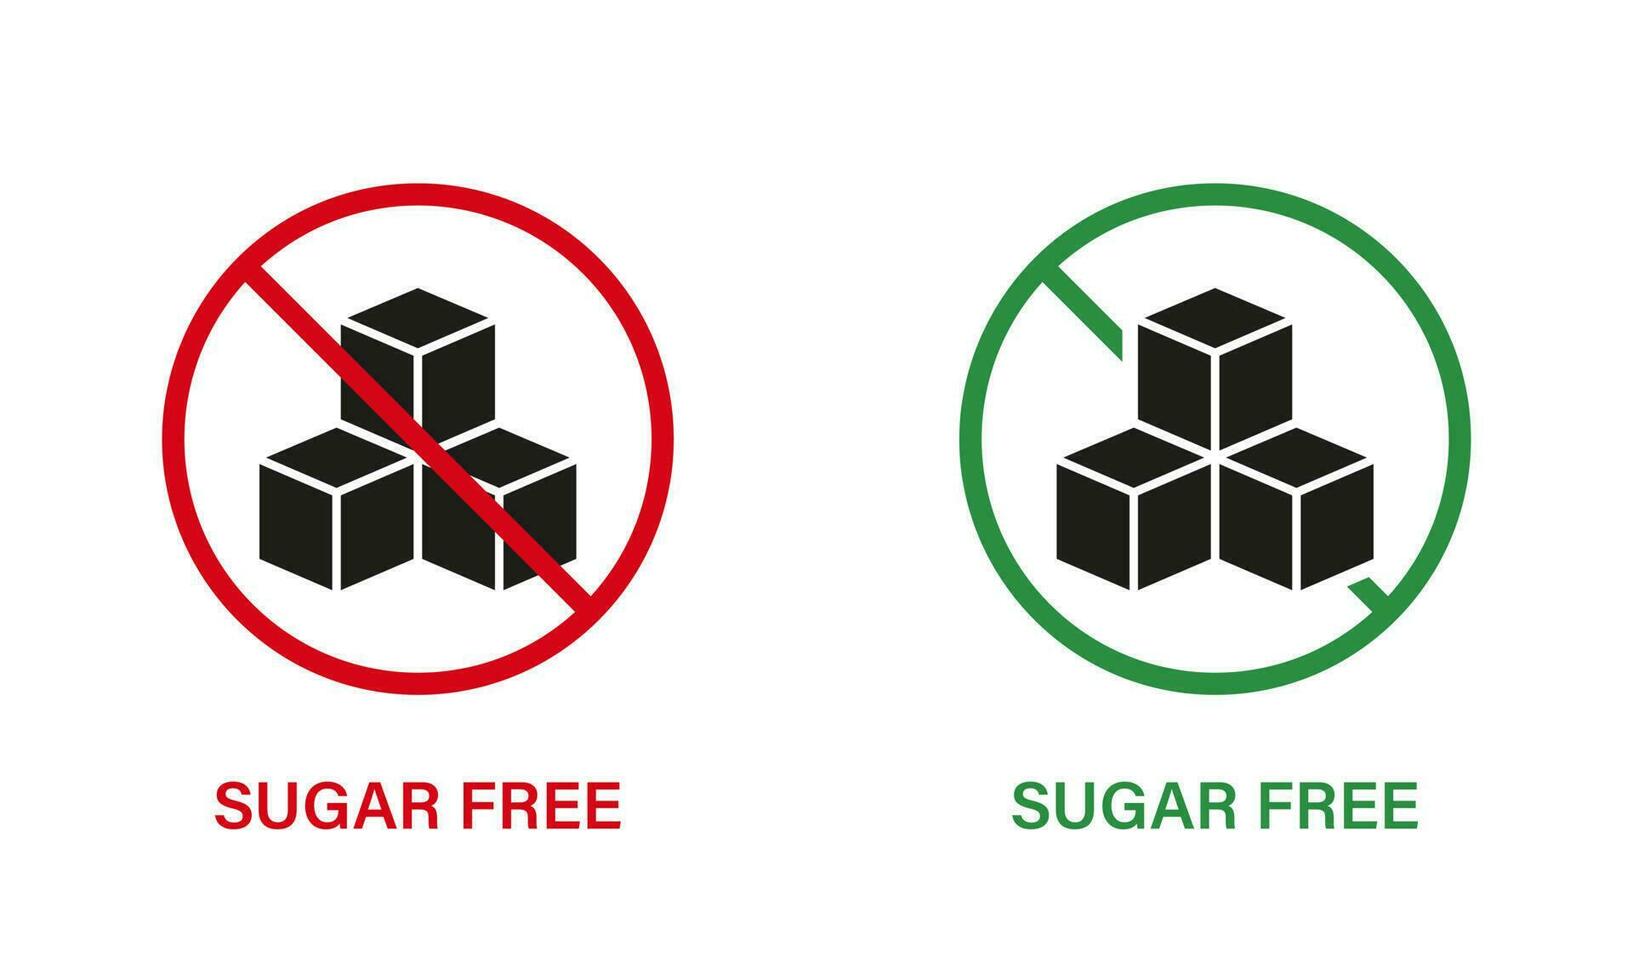 Sugar Free Silhouette Icon Set. Food No Added Sugar with Stop Sign. Glucose Forbidden Symbol. Zero Glucose Guarantee Logo. No Sugar for Diabetic Product Label. Isolated Vector Illustration.